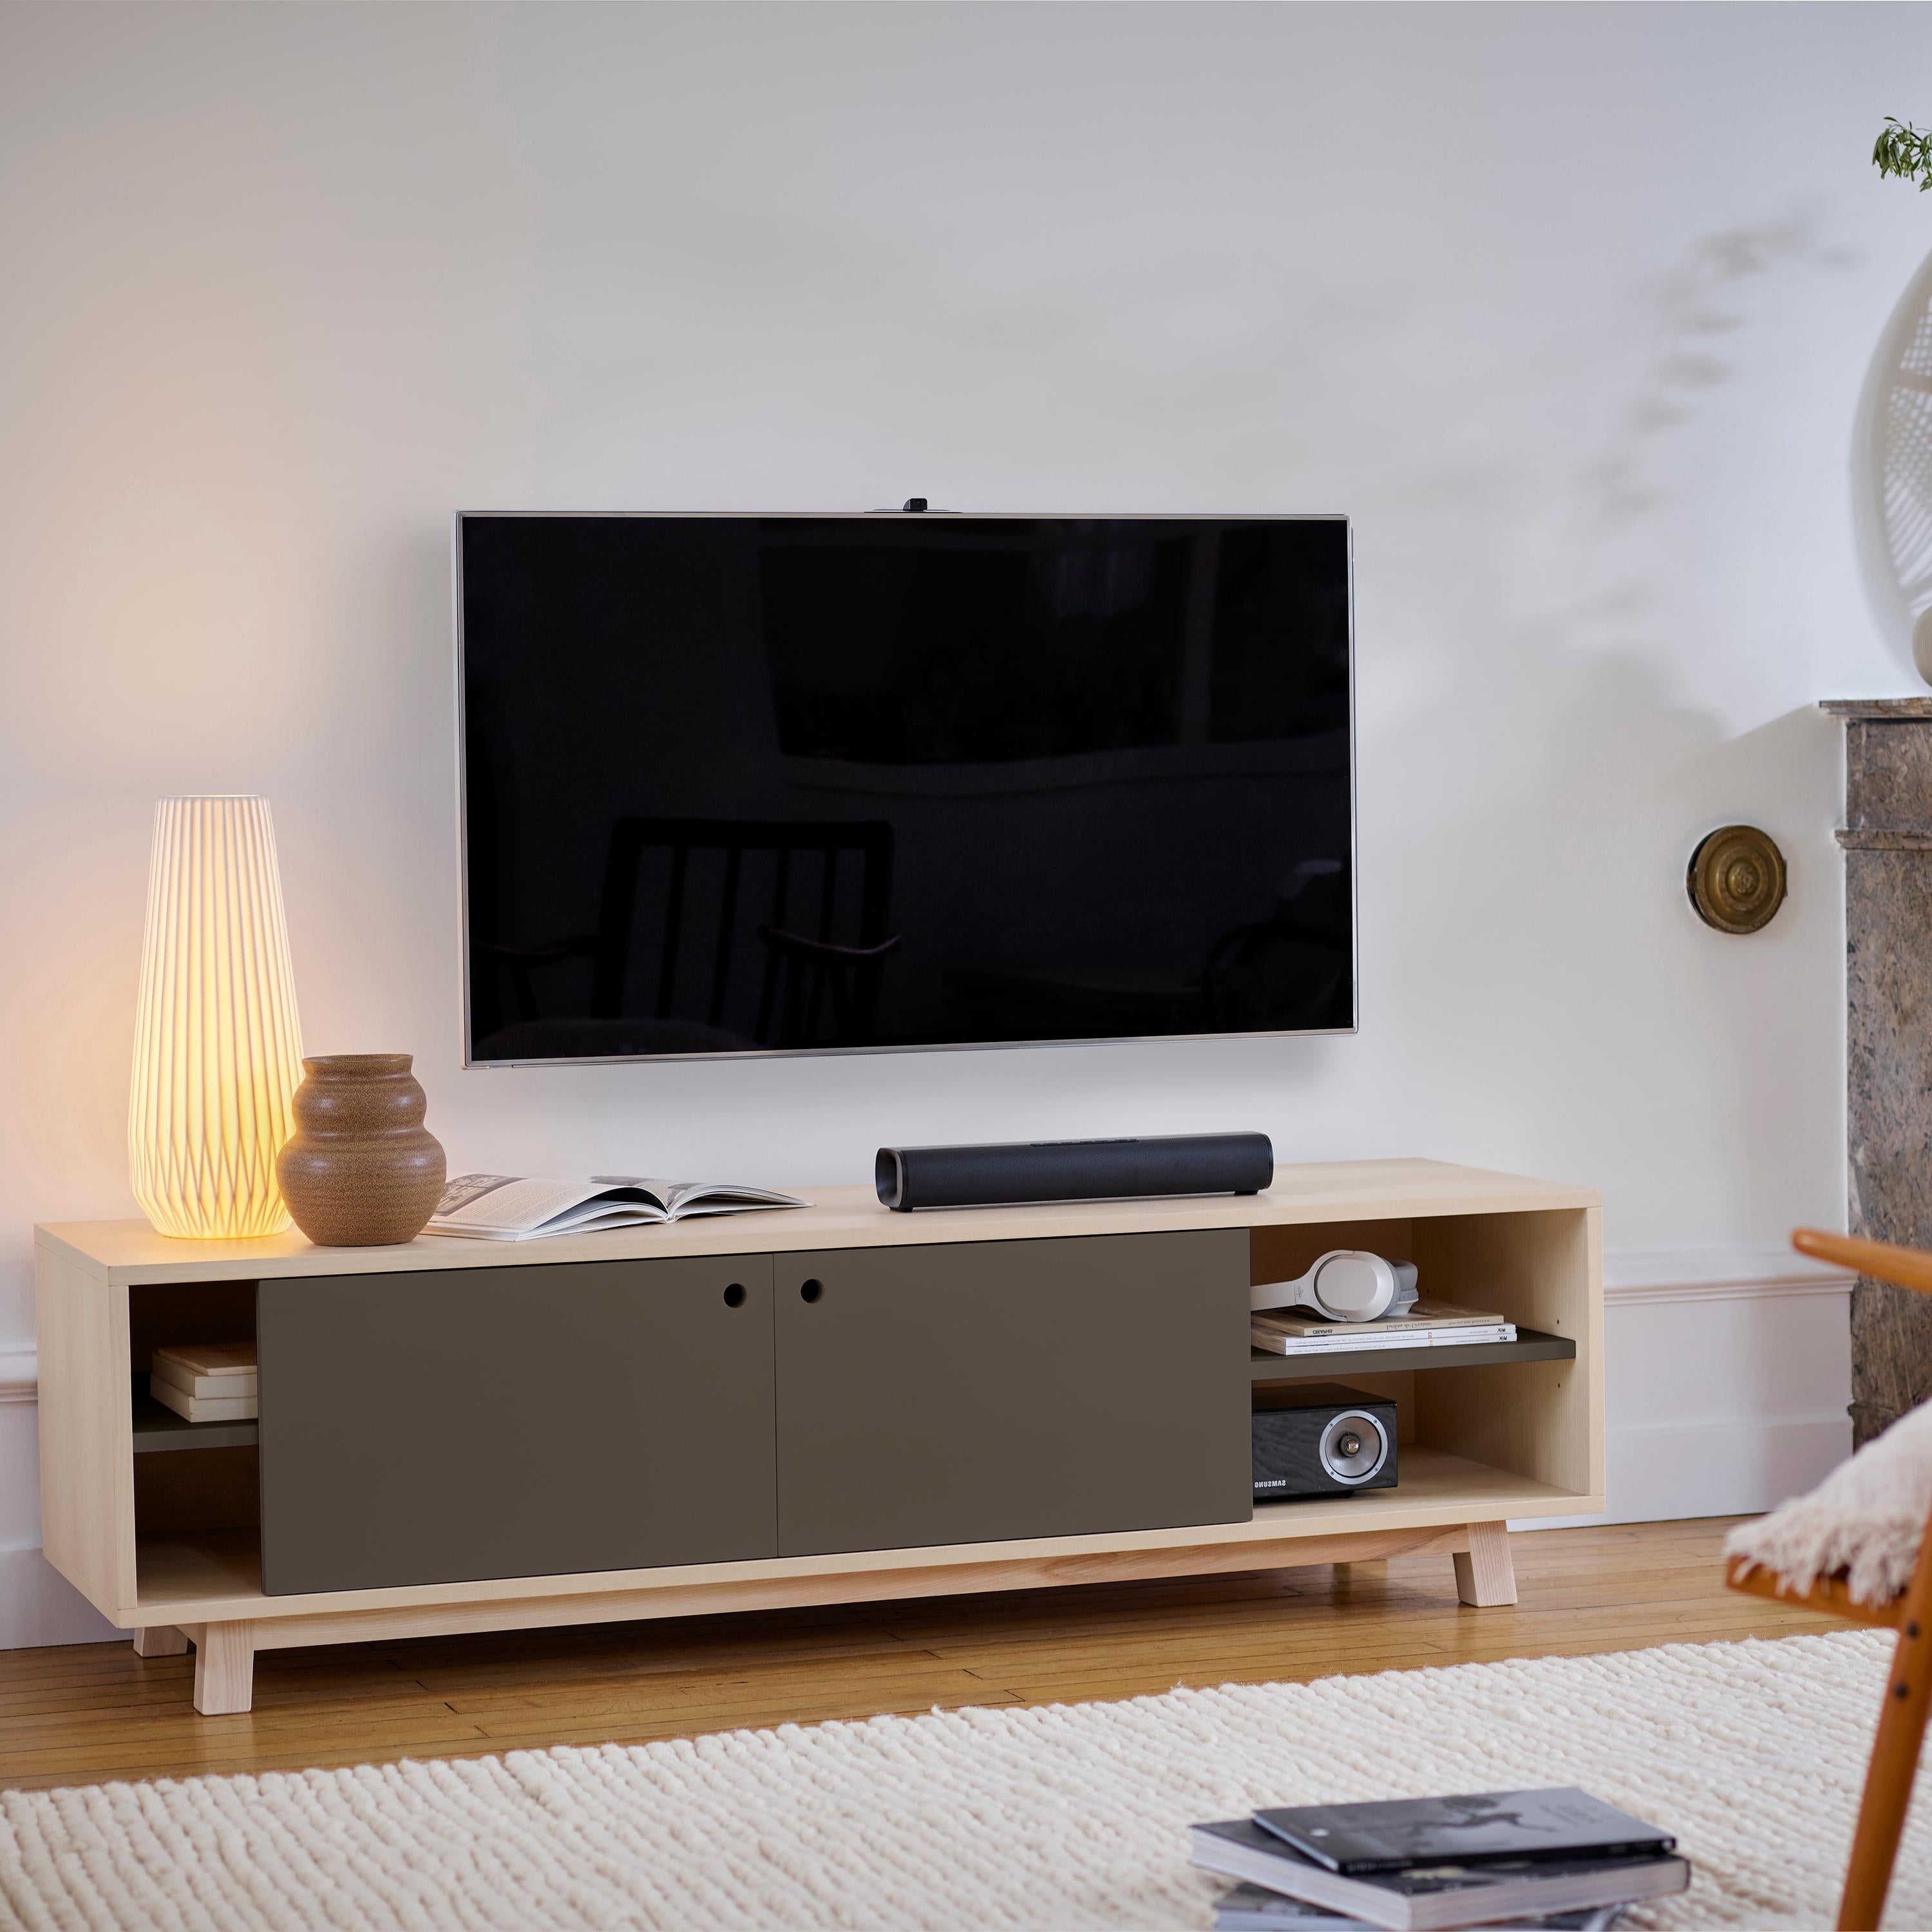 This TV stand with 2 sliding doors is designed by Eric Gizard - Paris.

It is 100% made in France with solid and veneer ash and lacquered MDF doors. 

To pull the door, use the round eyelet. 
2 adjustable wooden shelves on cleats are placed